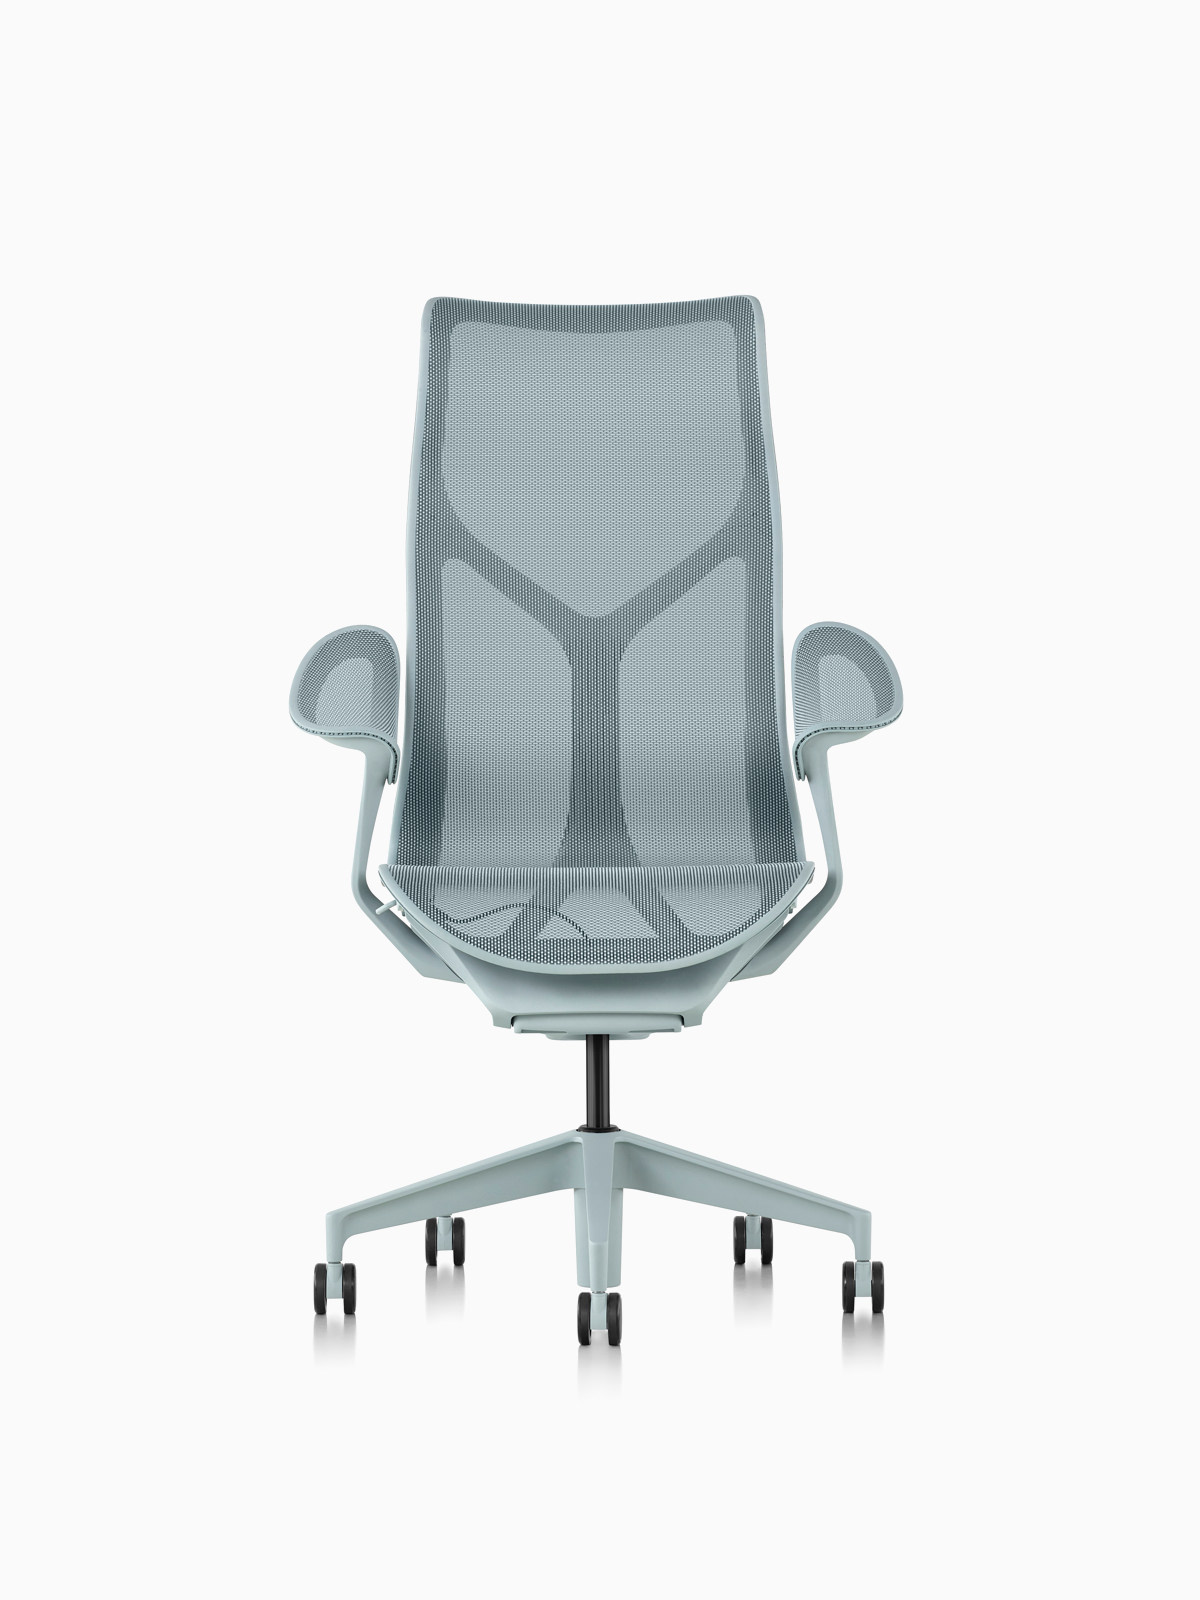 Cosm Chairs